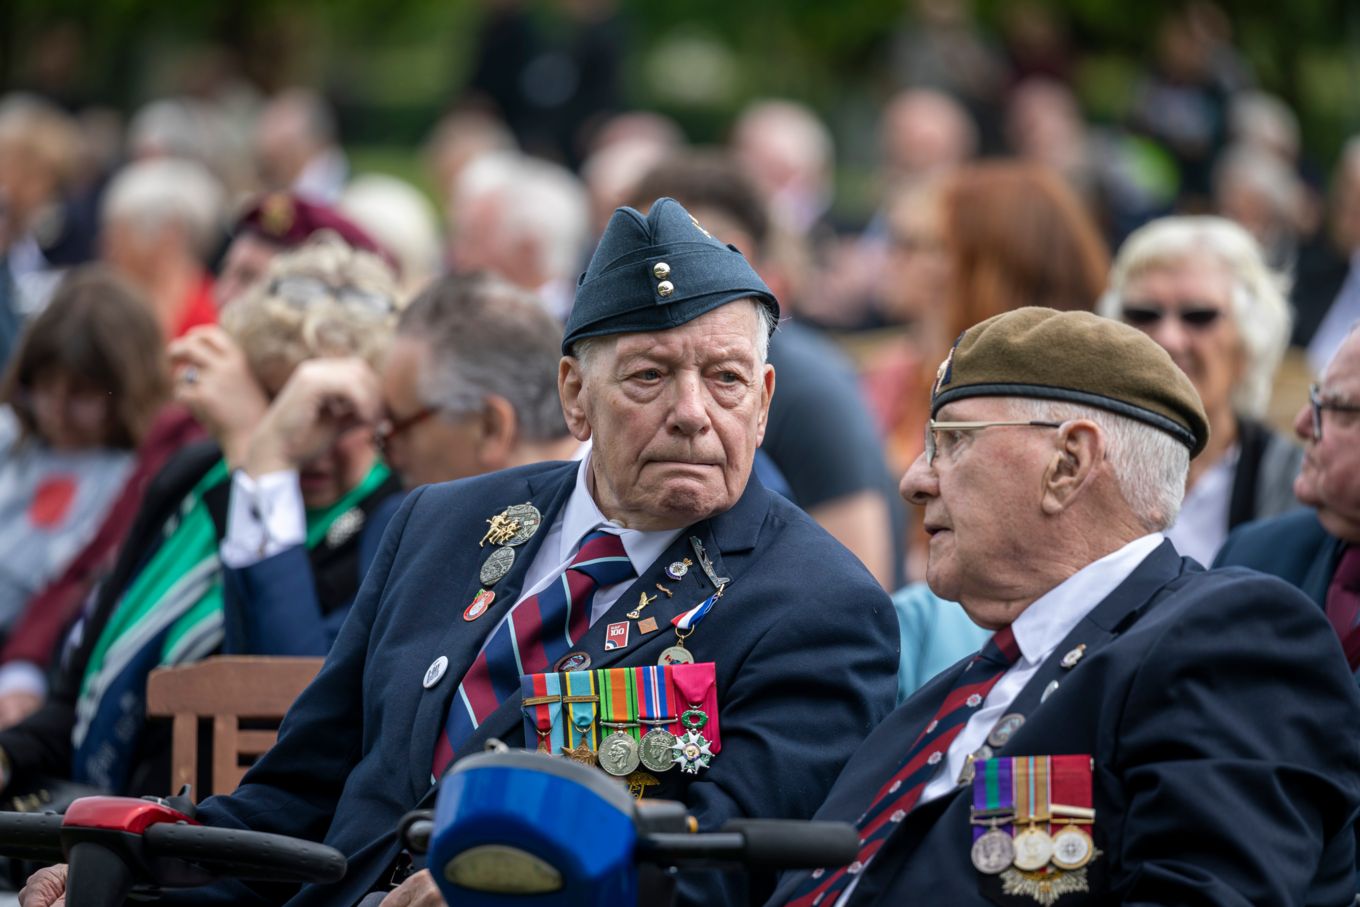 Image shows Armed Forces veterans.